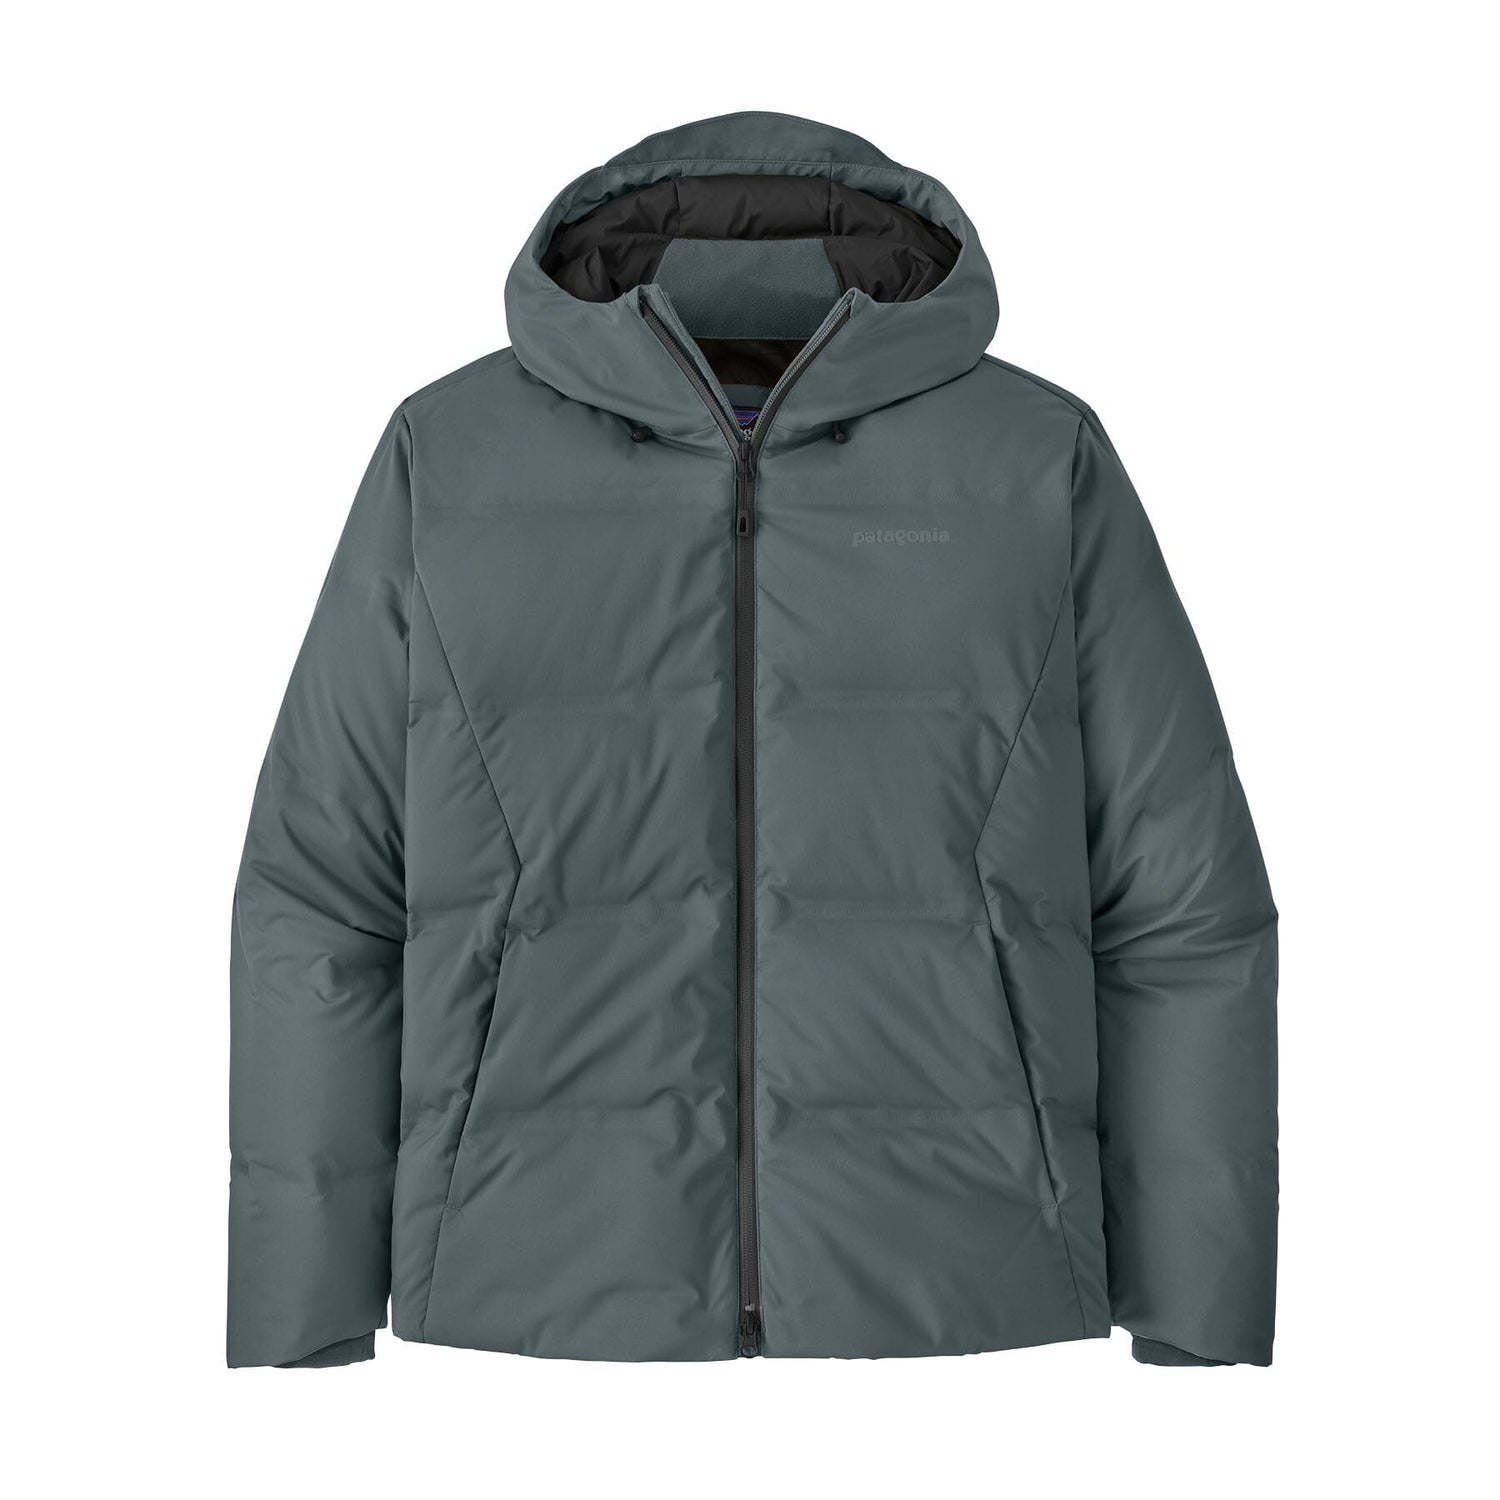 Patagonia M's Jackson Glacier Jacket - Recycled Down & Recycled Polyester Nouveau Green Jacket